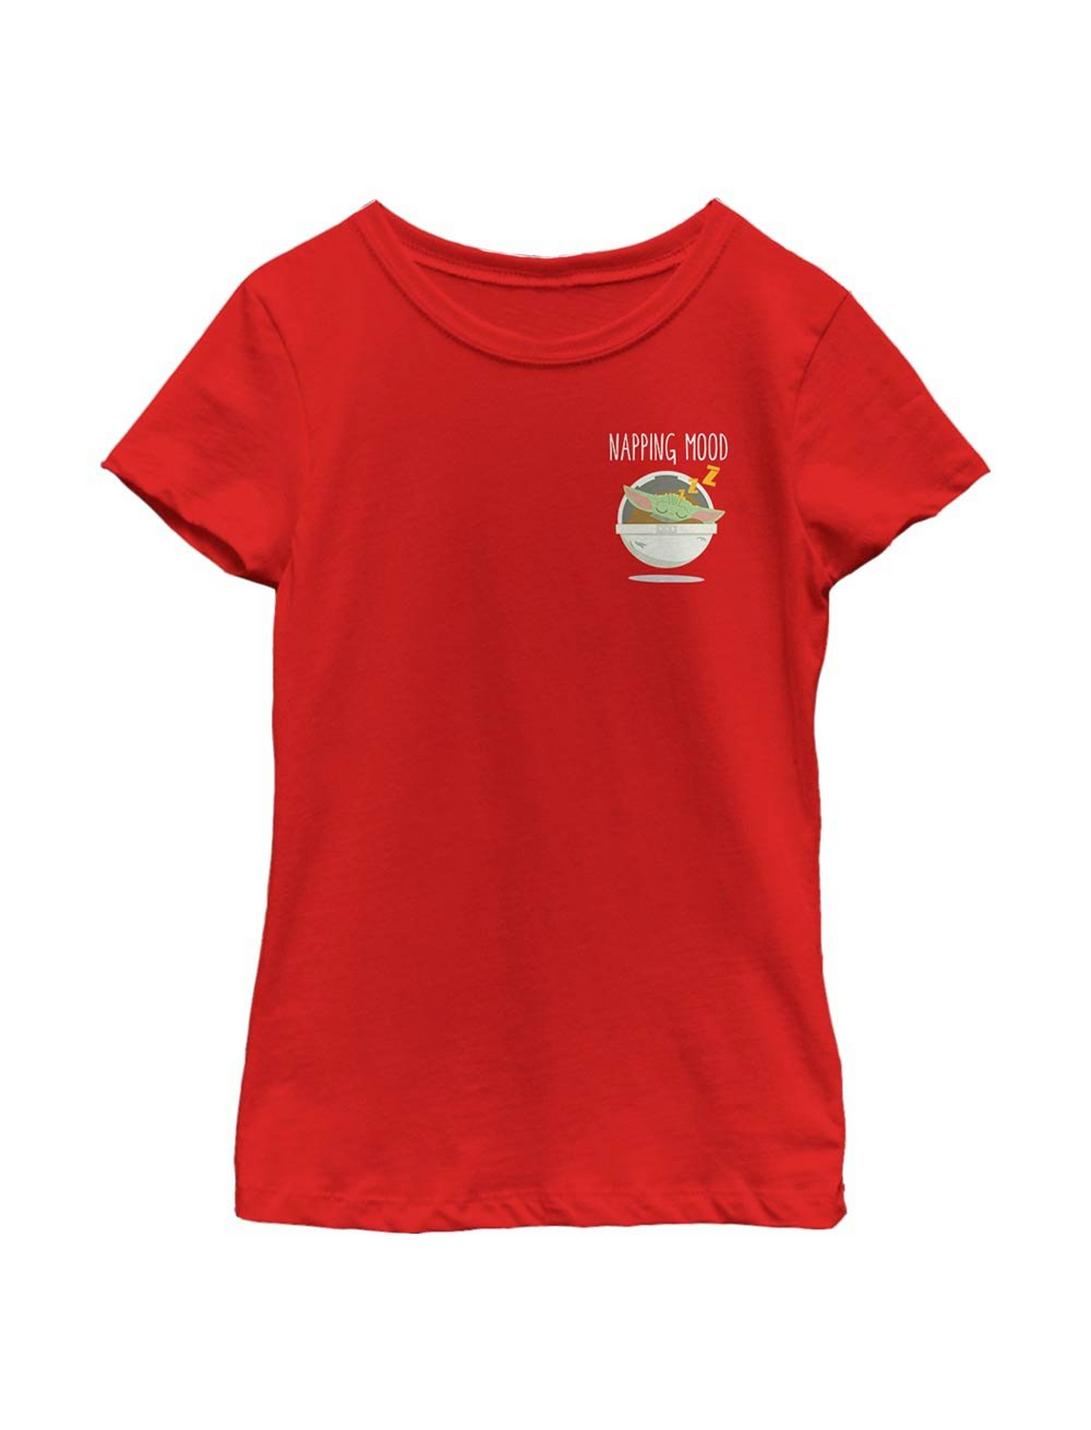 Plus Size Star Wars The Mandalorian The Child Pocket Nap Youth Girls T-Shirt, RED, hi-res